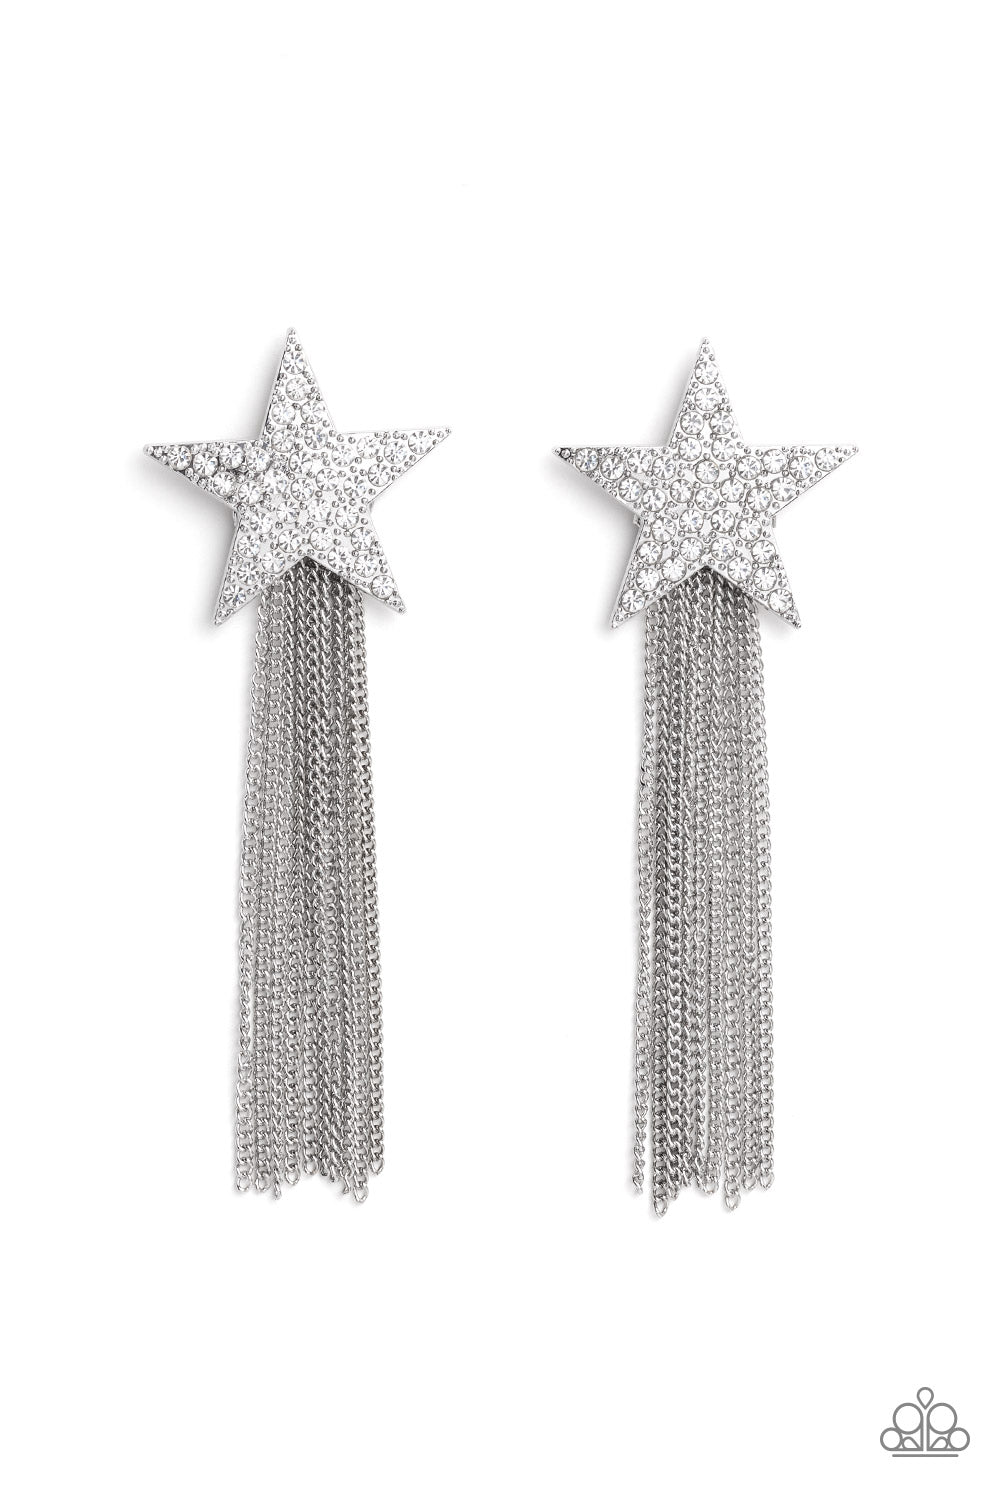 Superstar Solo - White Paparazzi Life of the Party Earrings